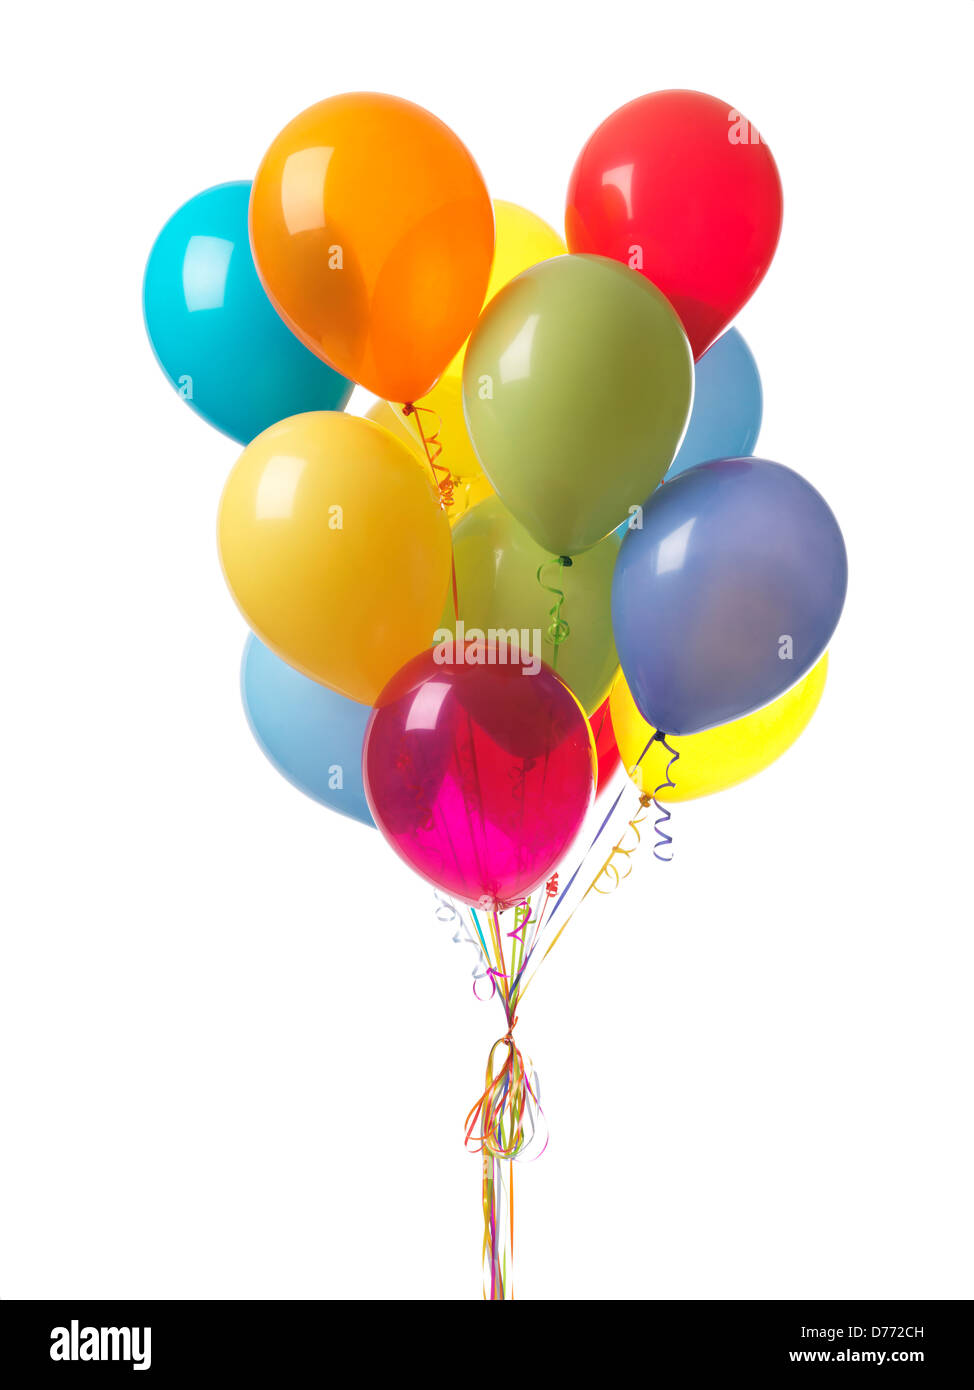 Colorful air balloons isolated on white background Stock Photo